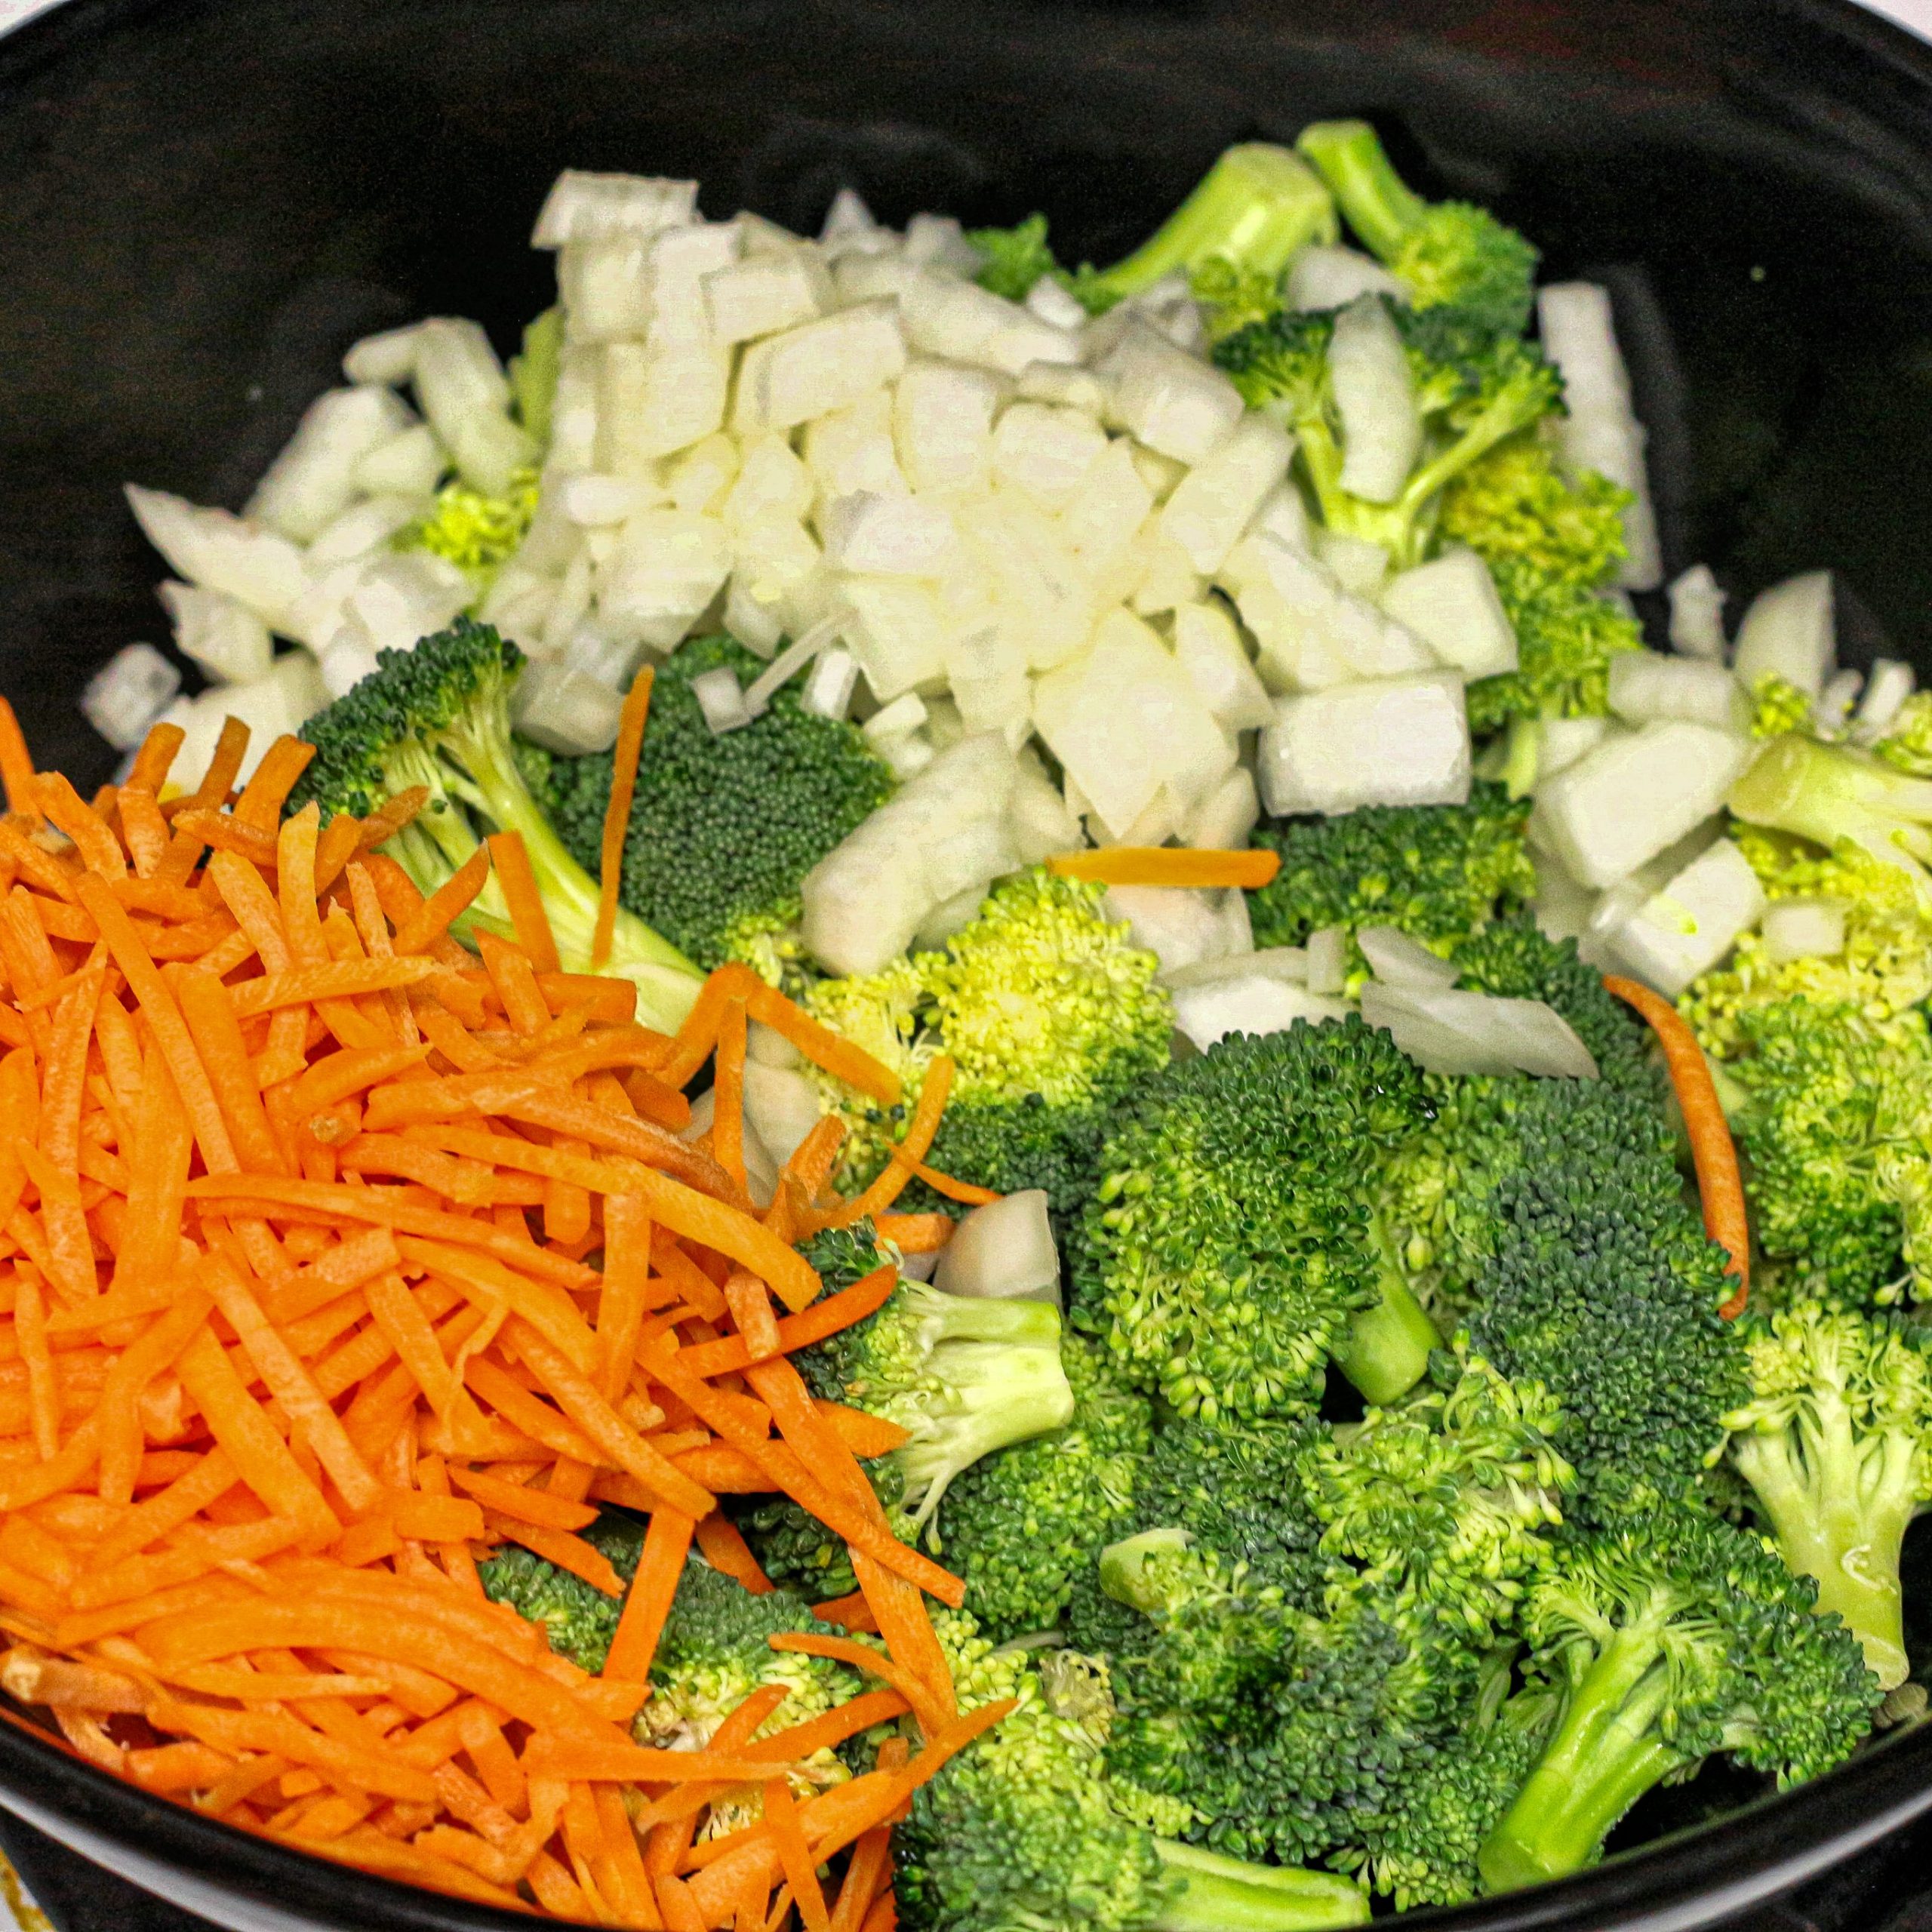 Stir-fry broccoli, carrots, and onion in the remaining oil. Add the beef and sauce.